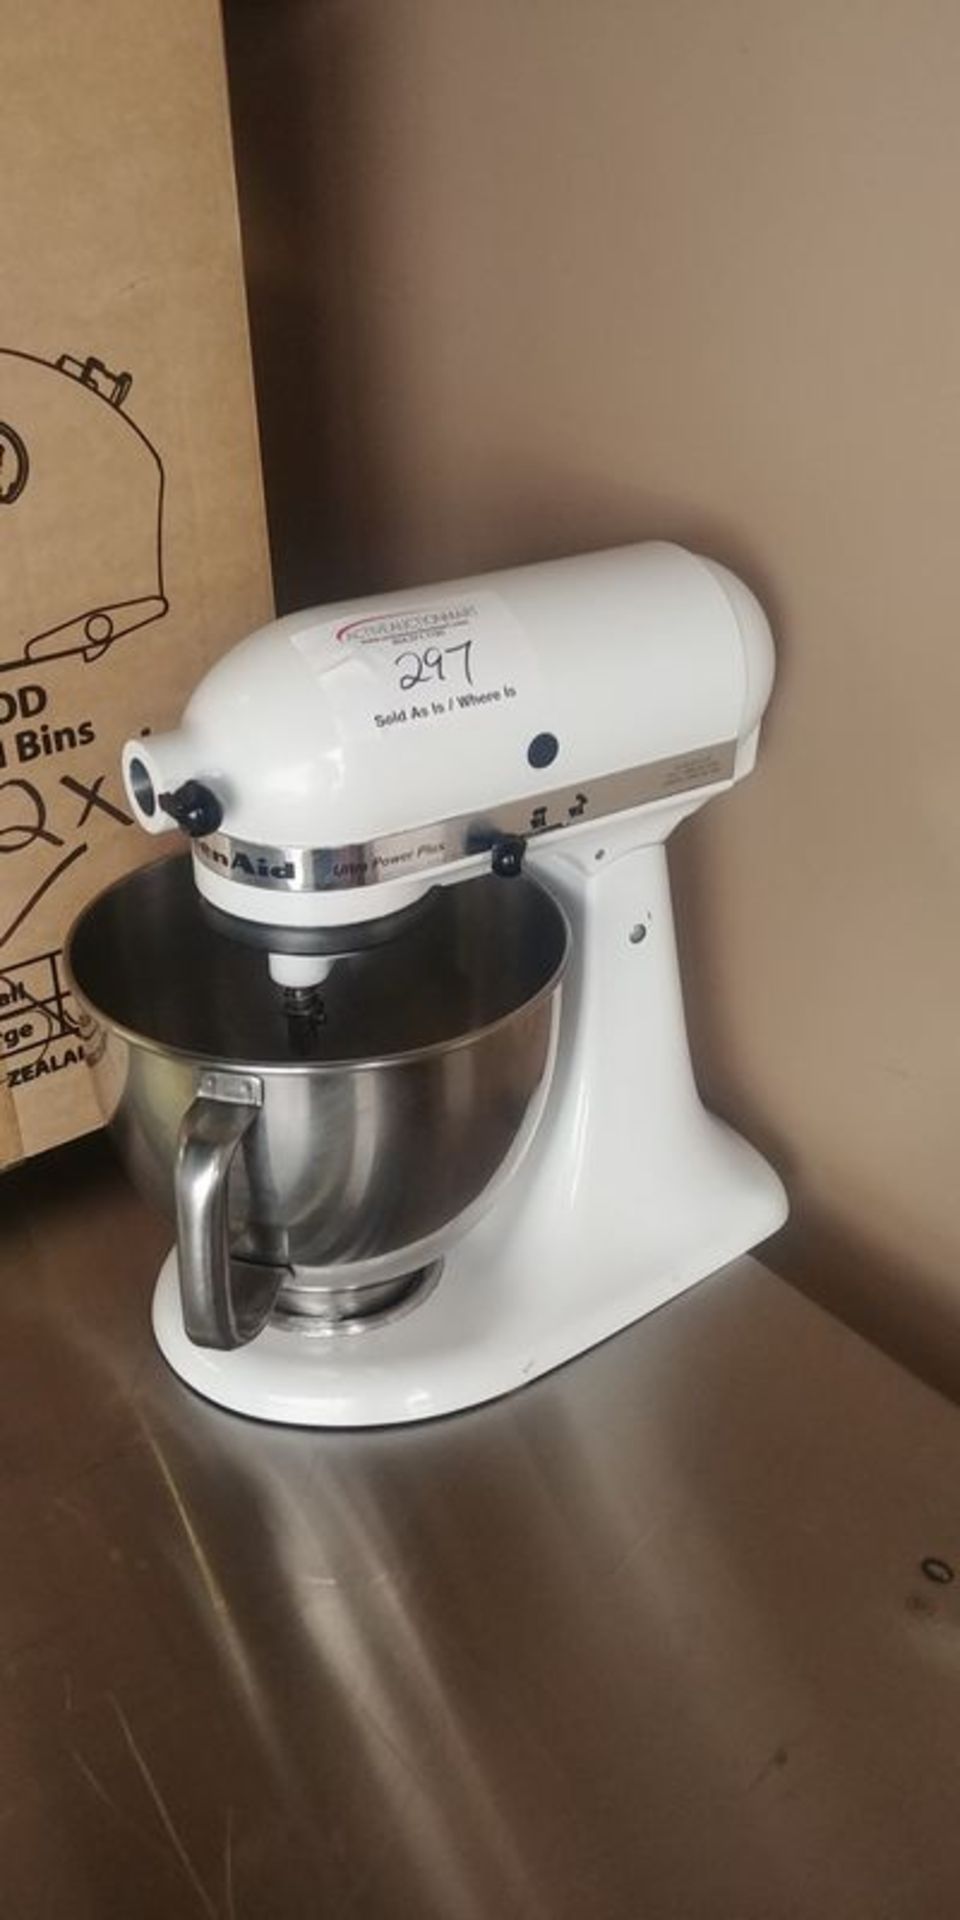 KitchenAid 5 Quart Mixer with Extra Bowl and Attachments